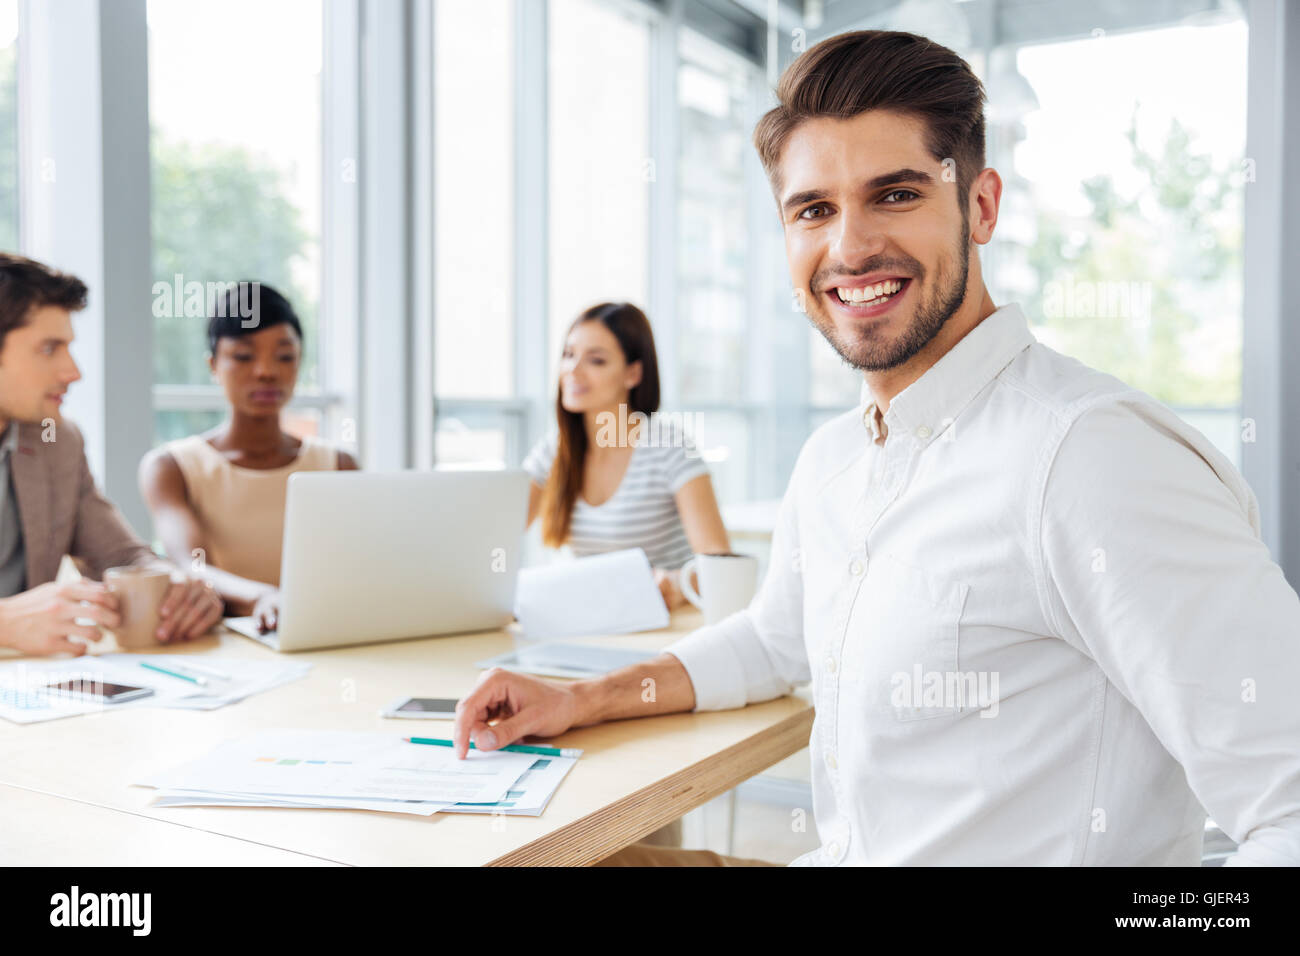 Happy attractive young businessman working with colleagues in office Stock Photo